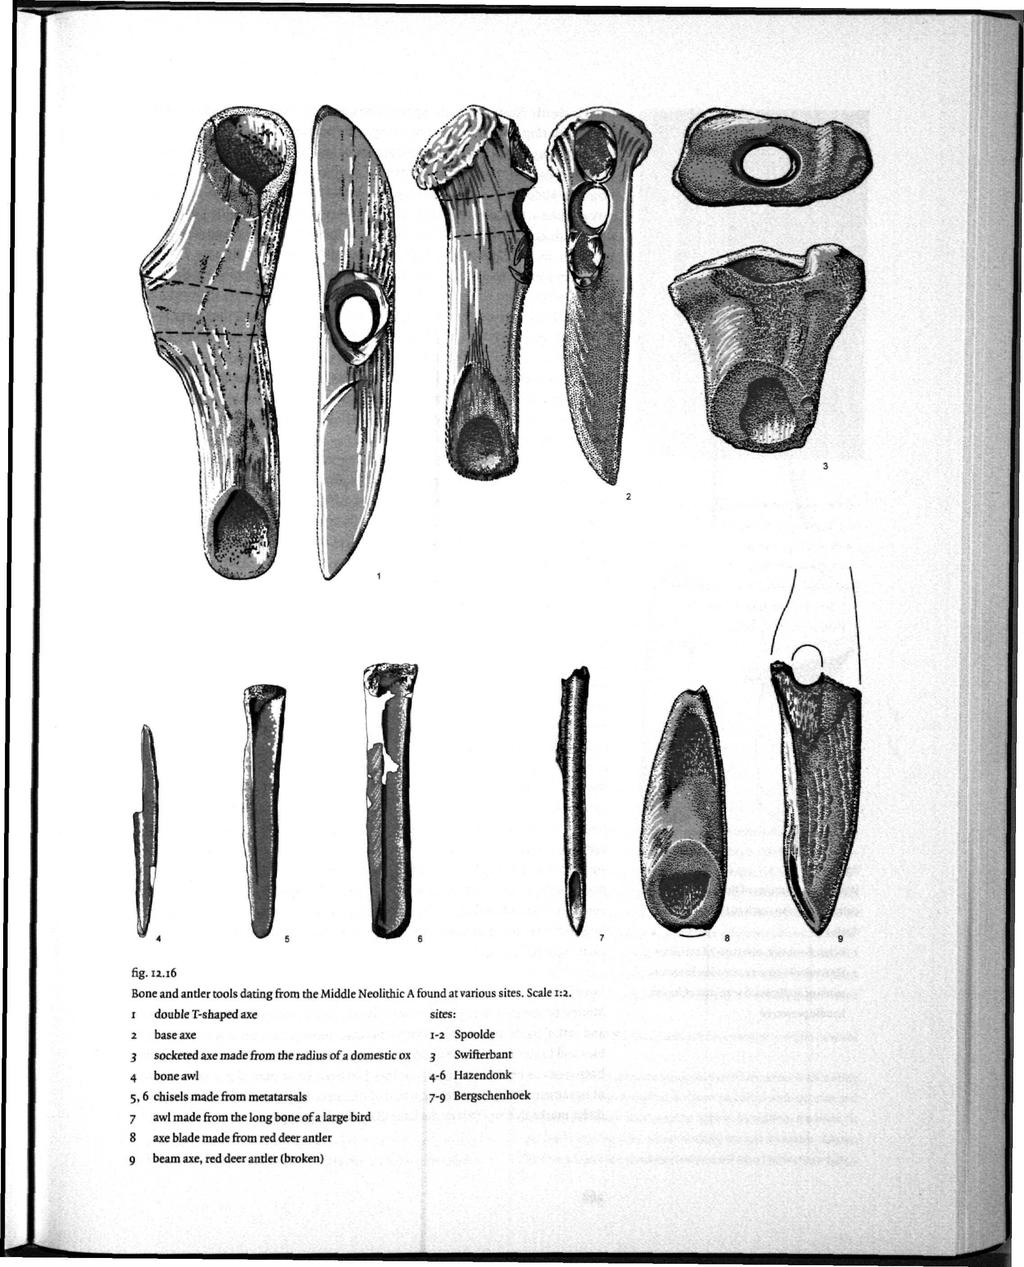 fig. 12.16 Bone and ander tools dating from the Middle Neolithic A found at various sites. Scale in.